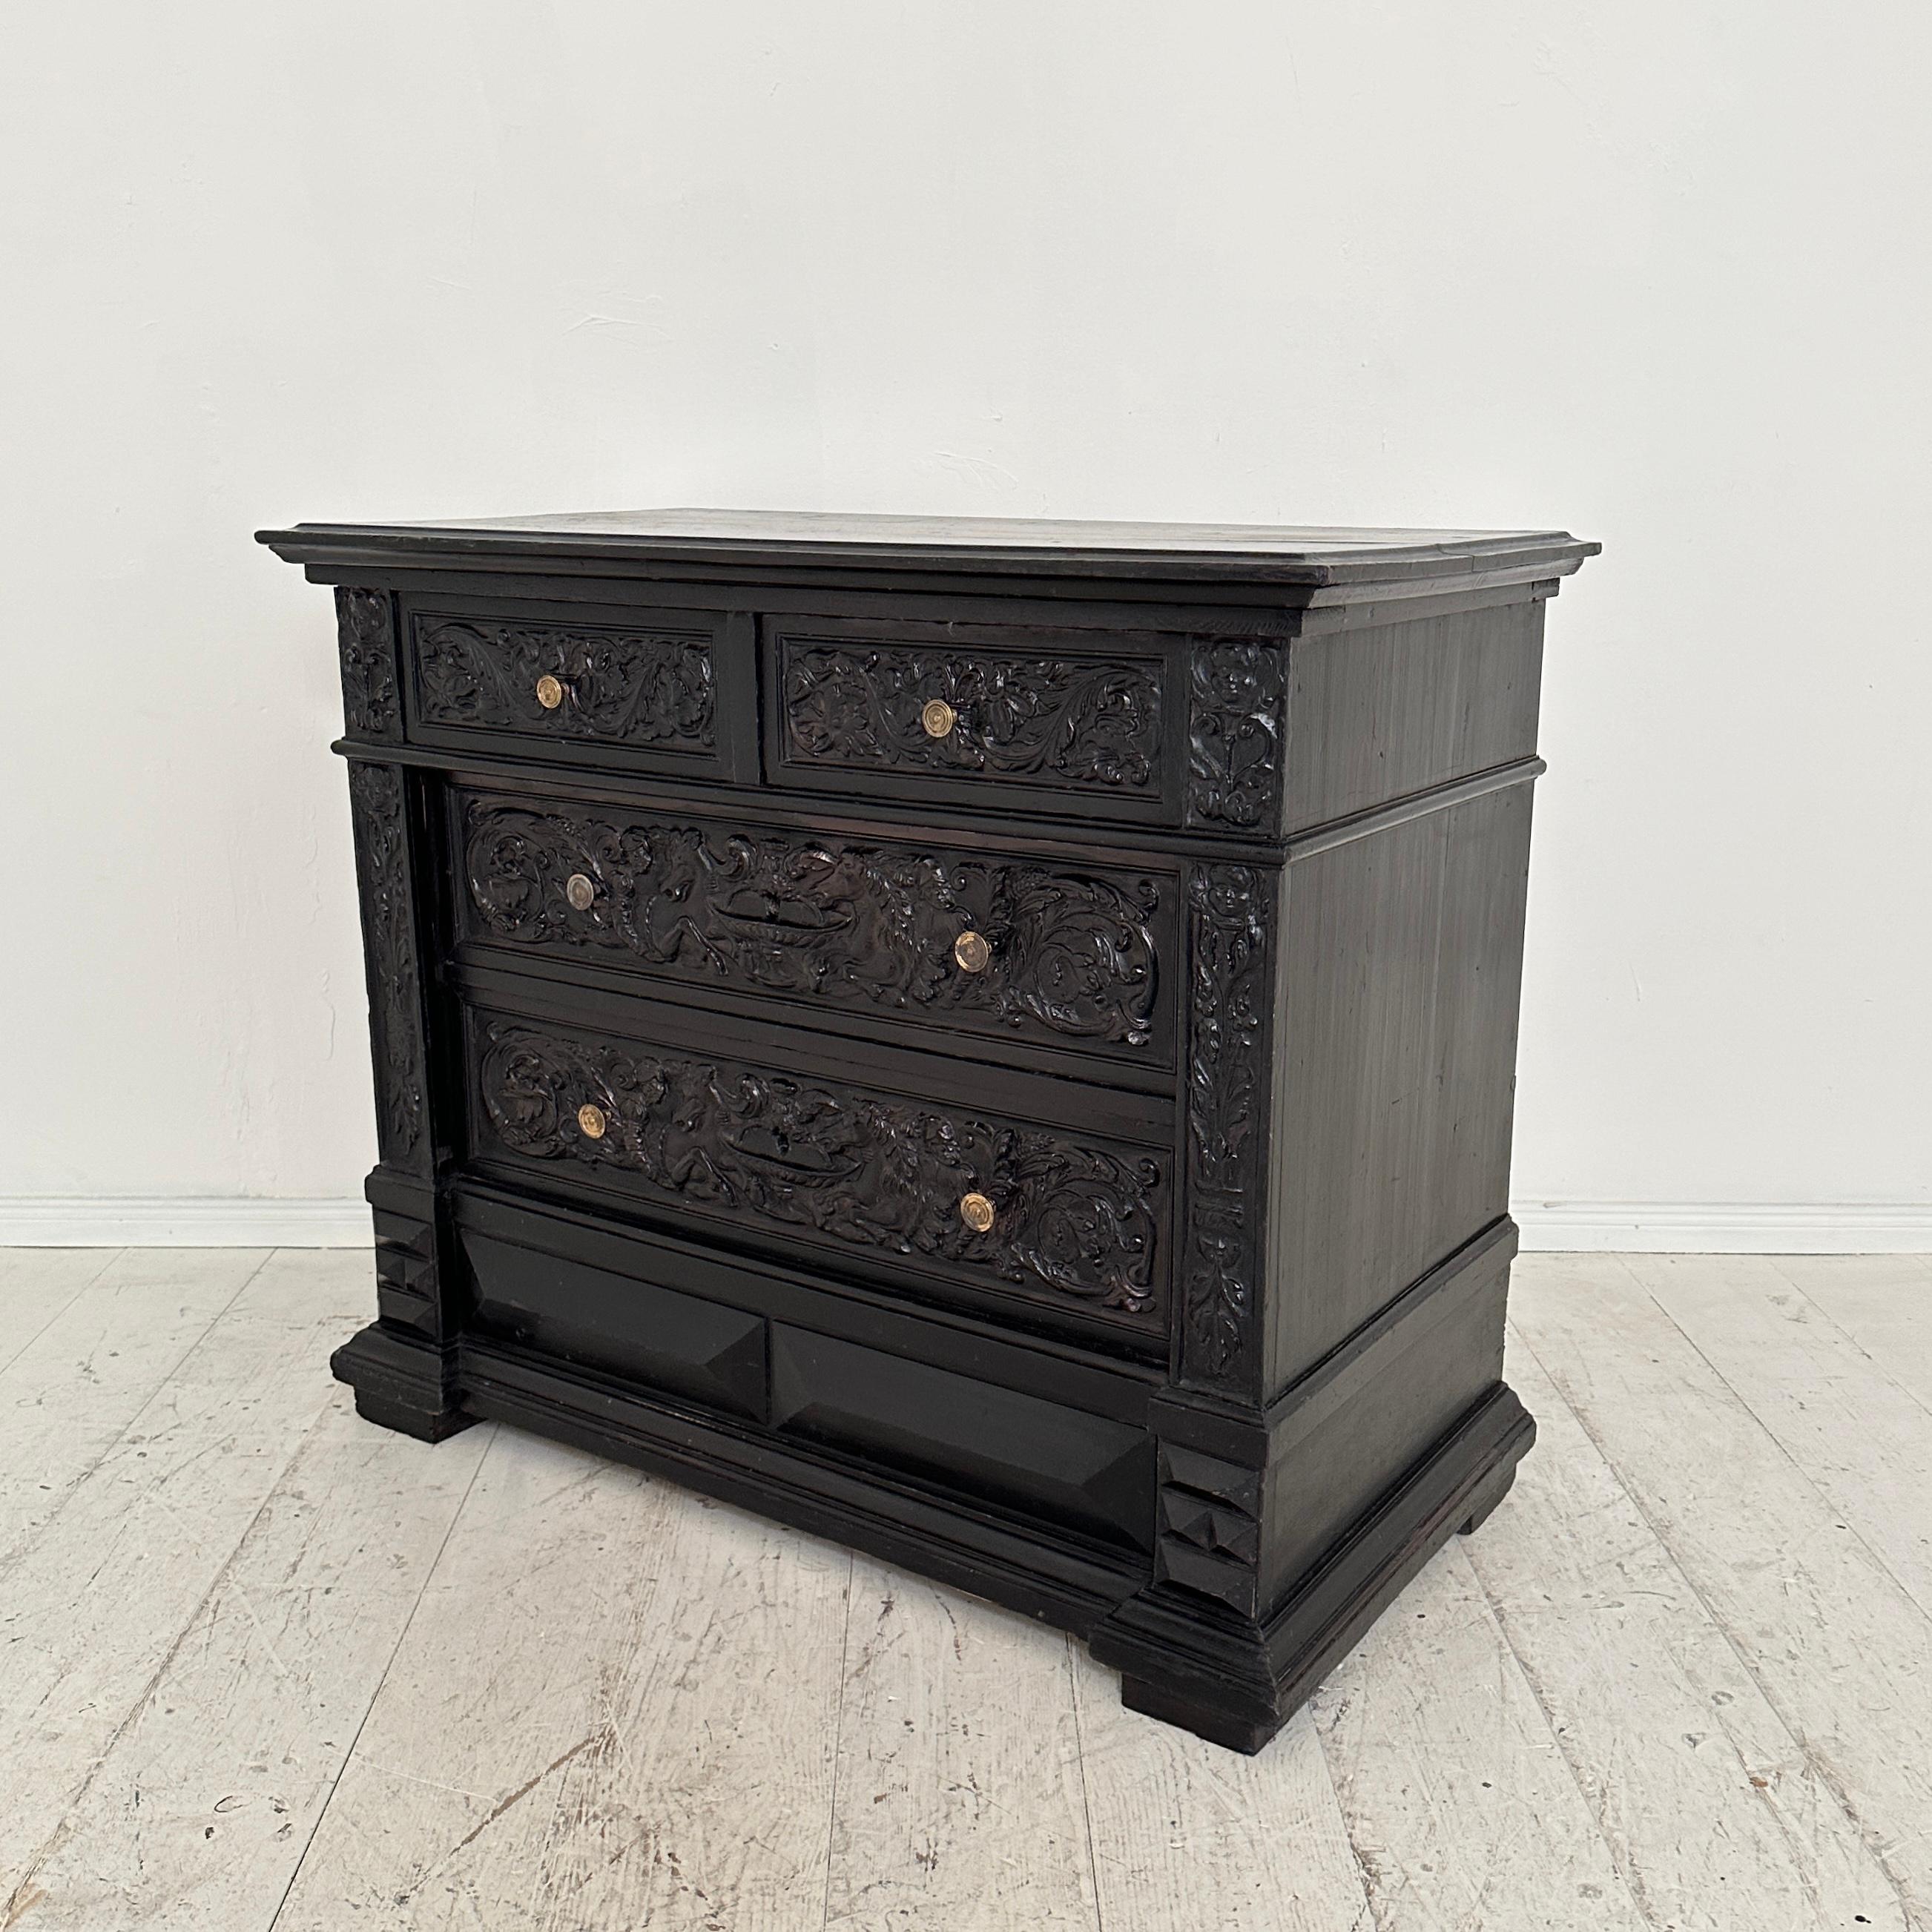 Travel through time with this exceptional late 19th-century German Renaissance-style chest of drawers, dating back to around 1880. Crafted from pine, the piece is a rare and extraordinary testament to the intricate artistry of the era. 
The chest's